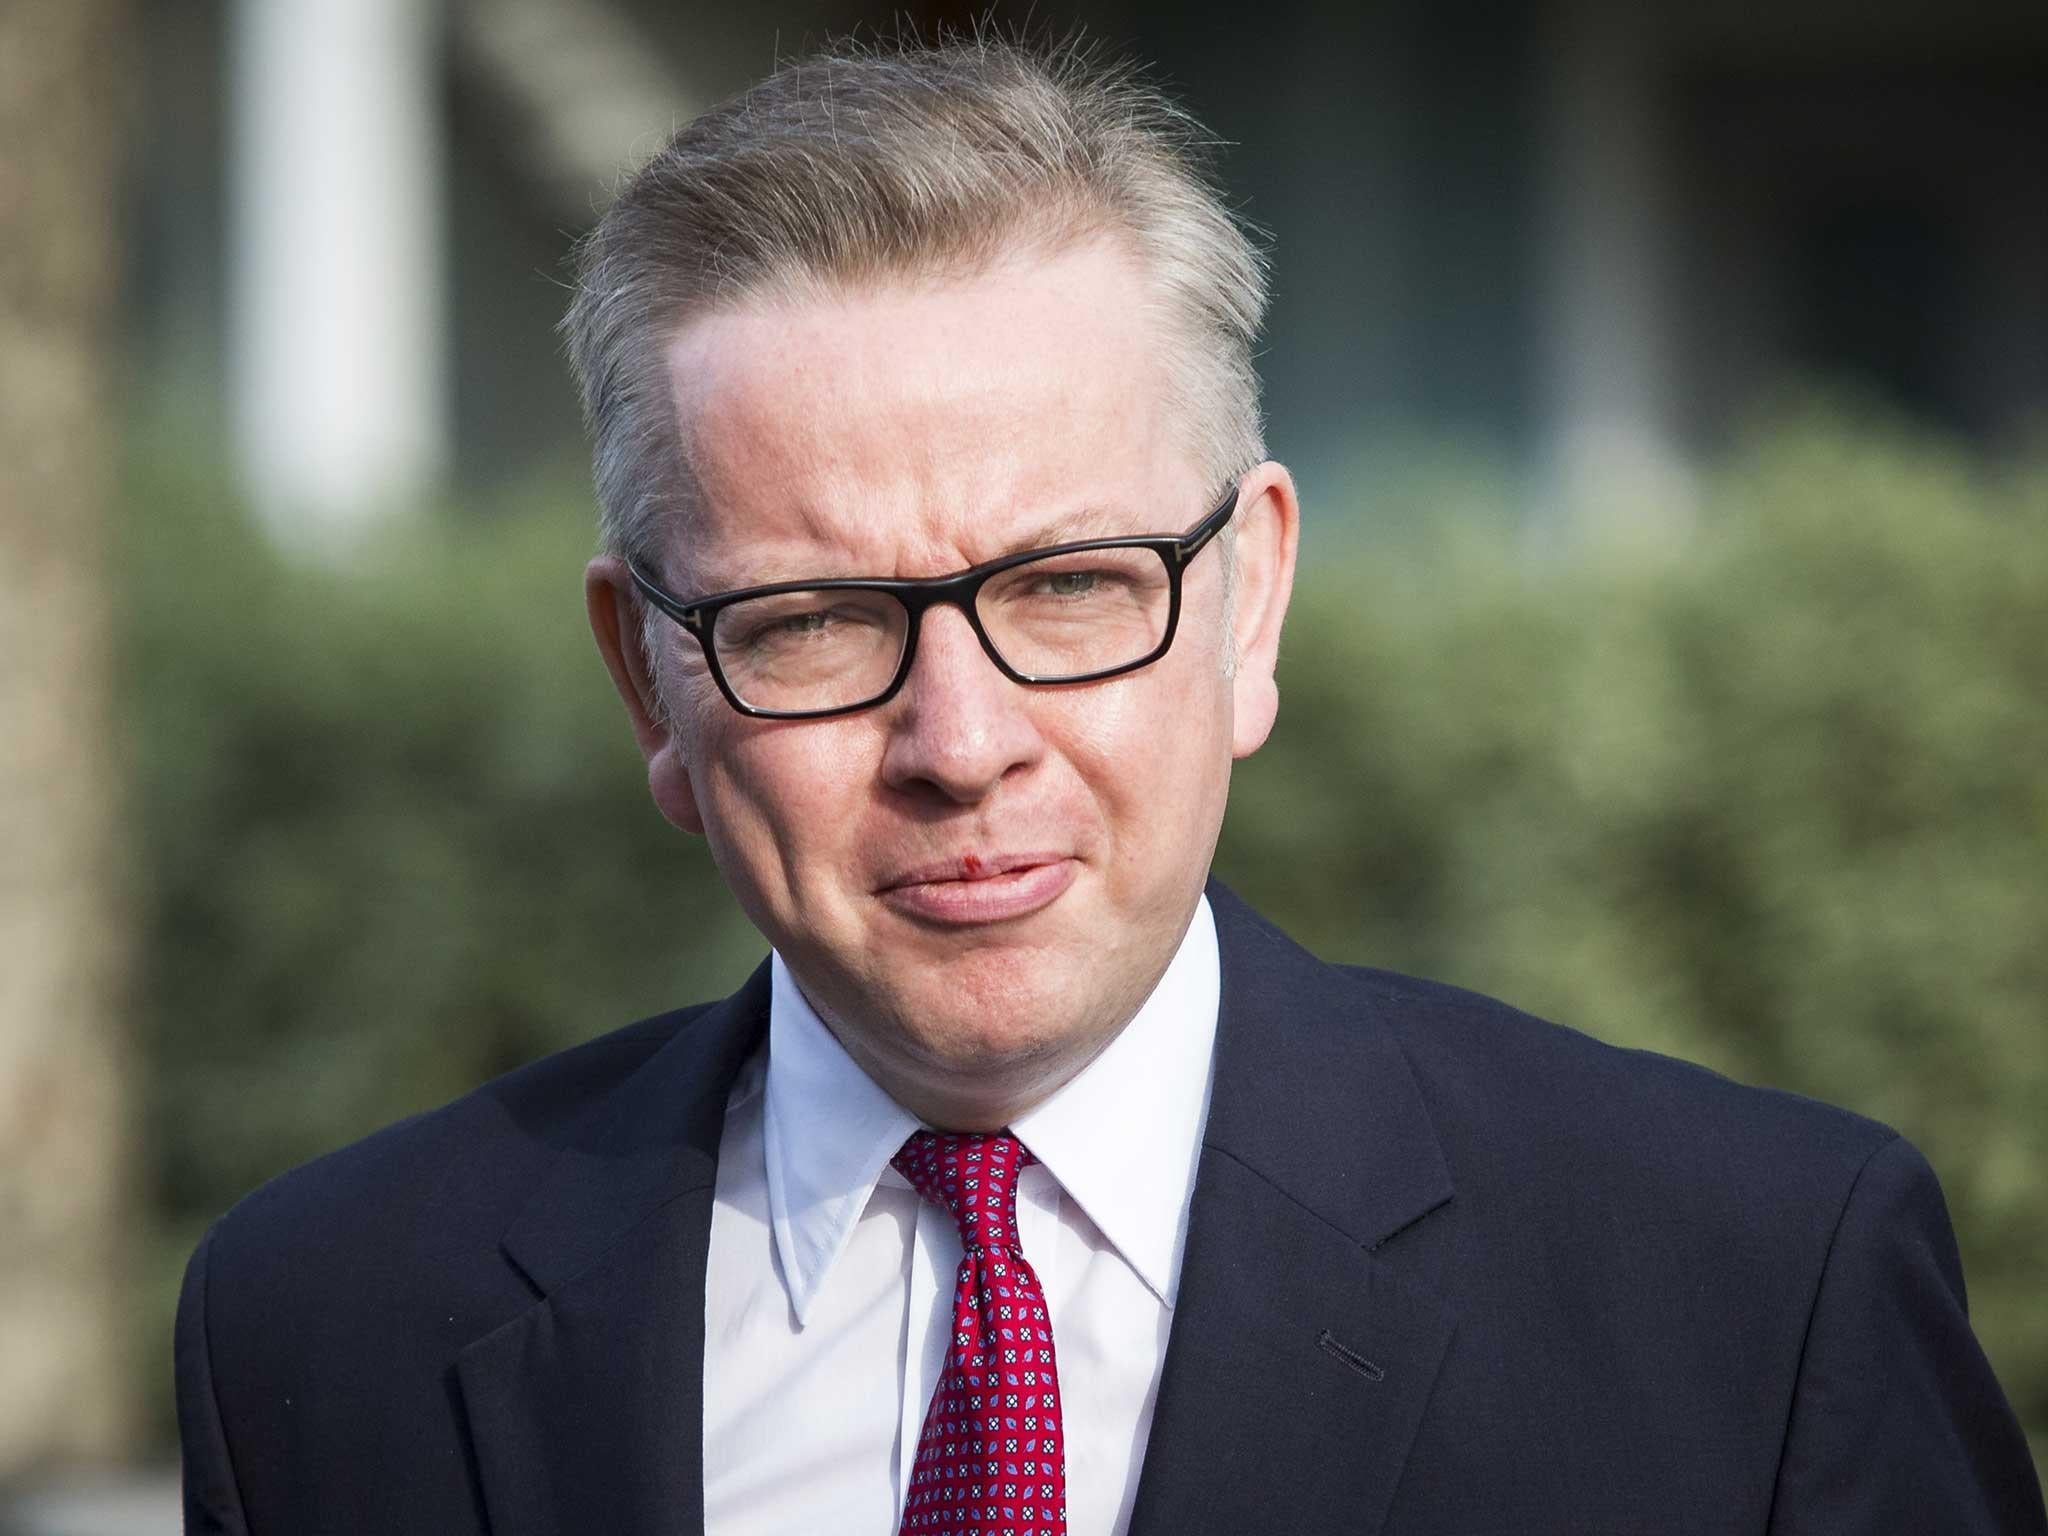 Michael Gove is still on a tirade against experts